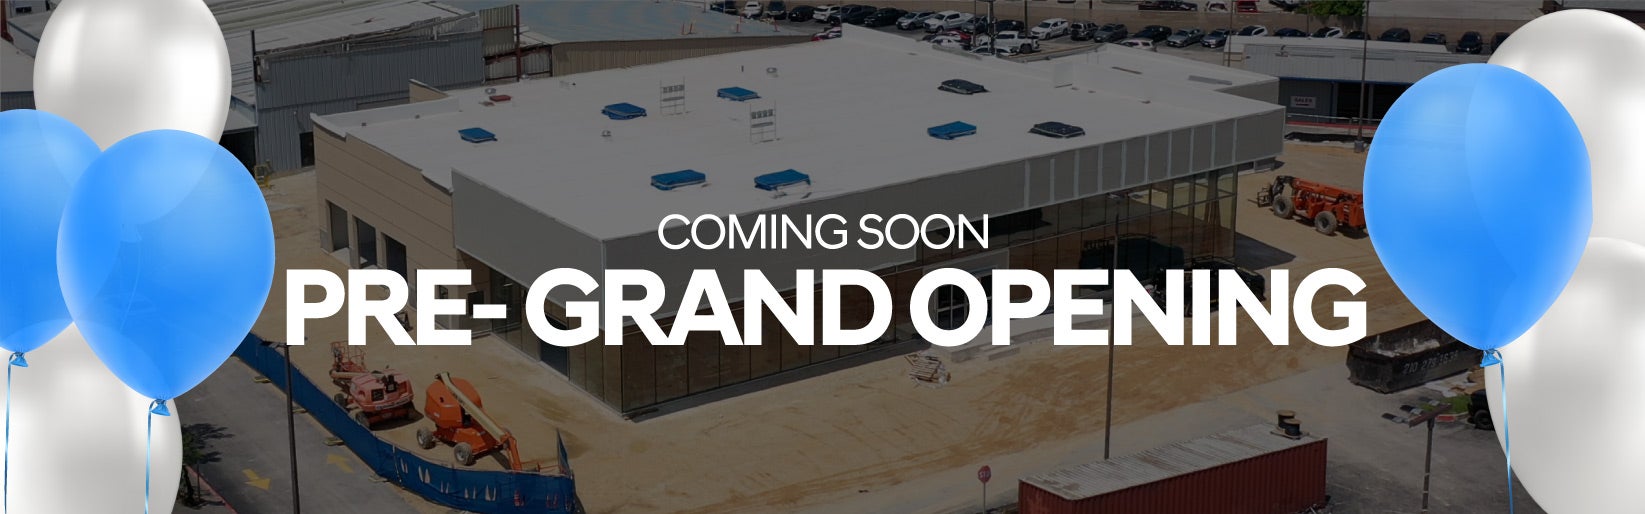 Coming Soon - Pre-Grand Opening